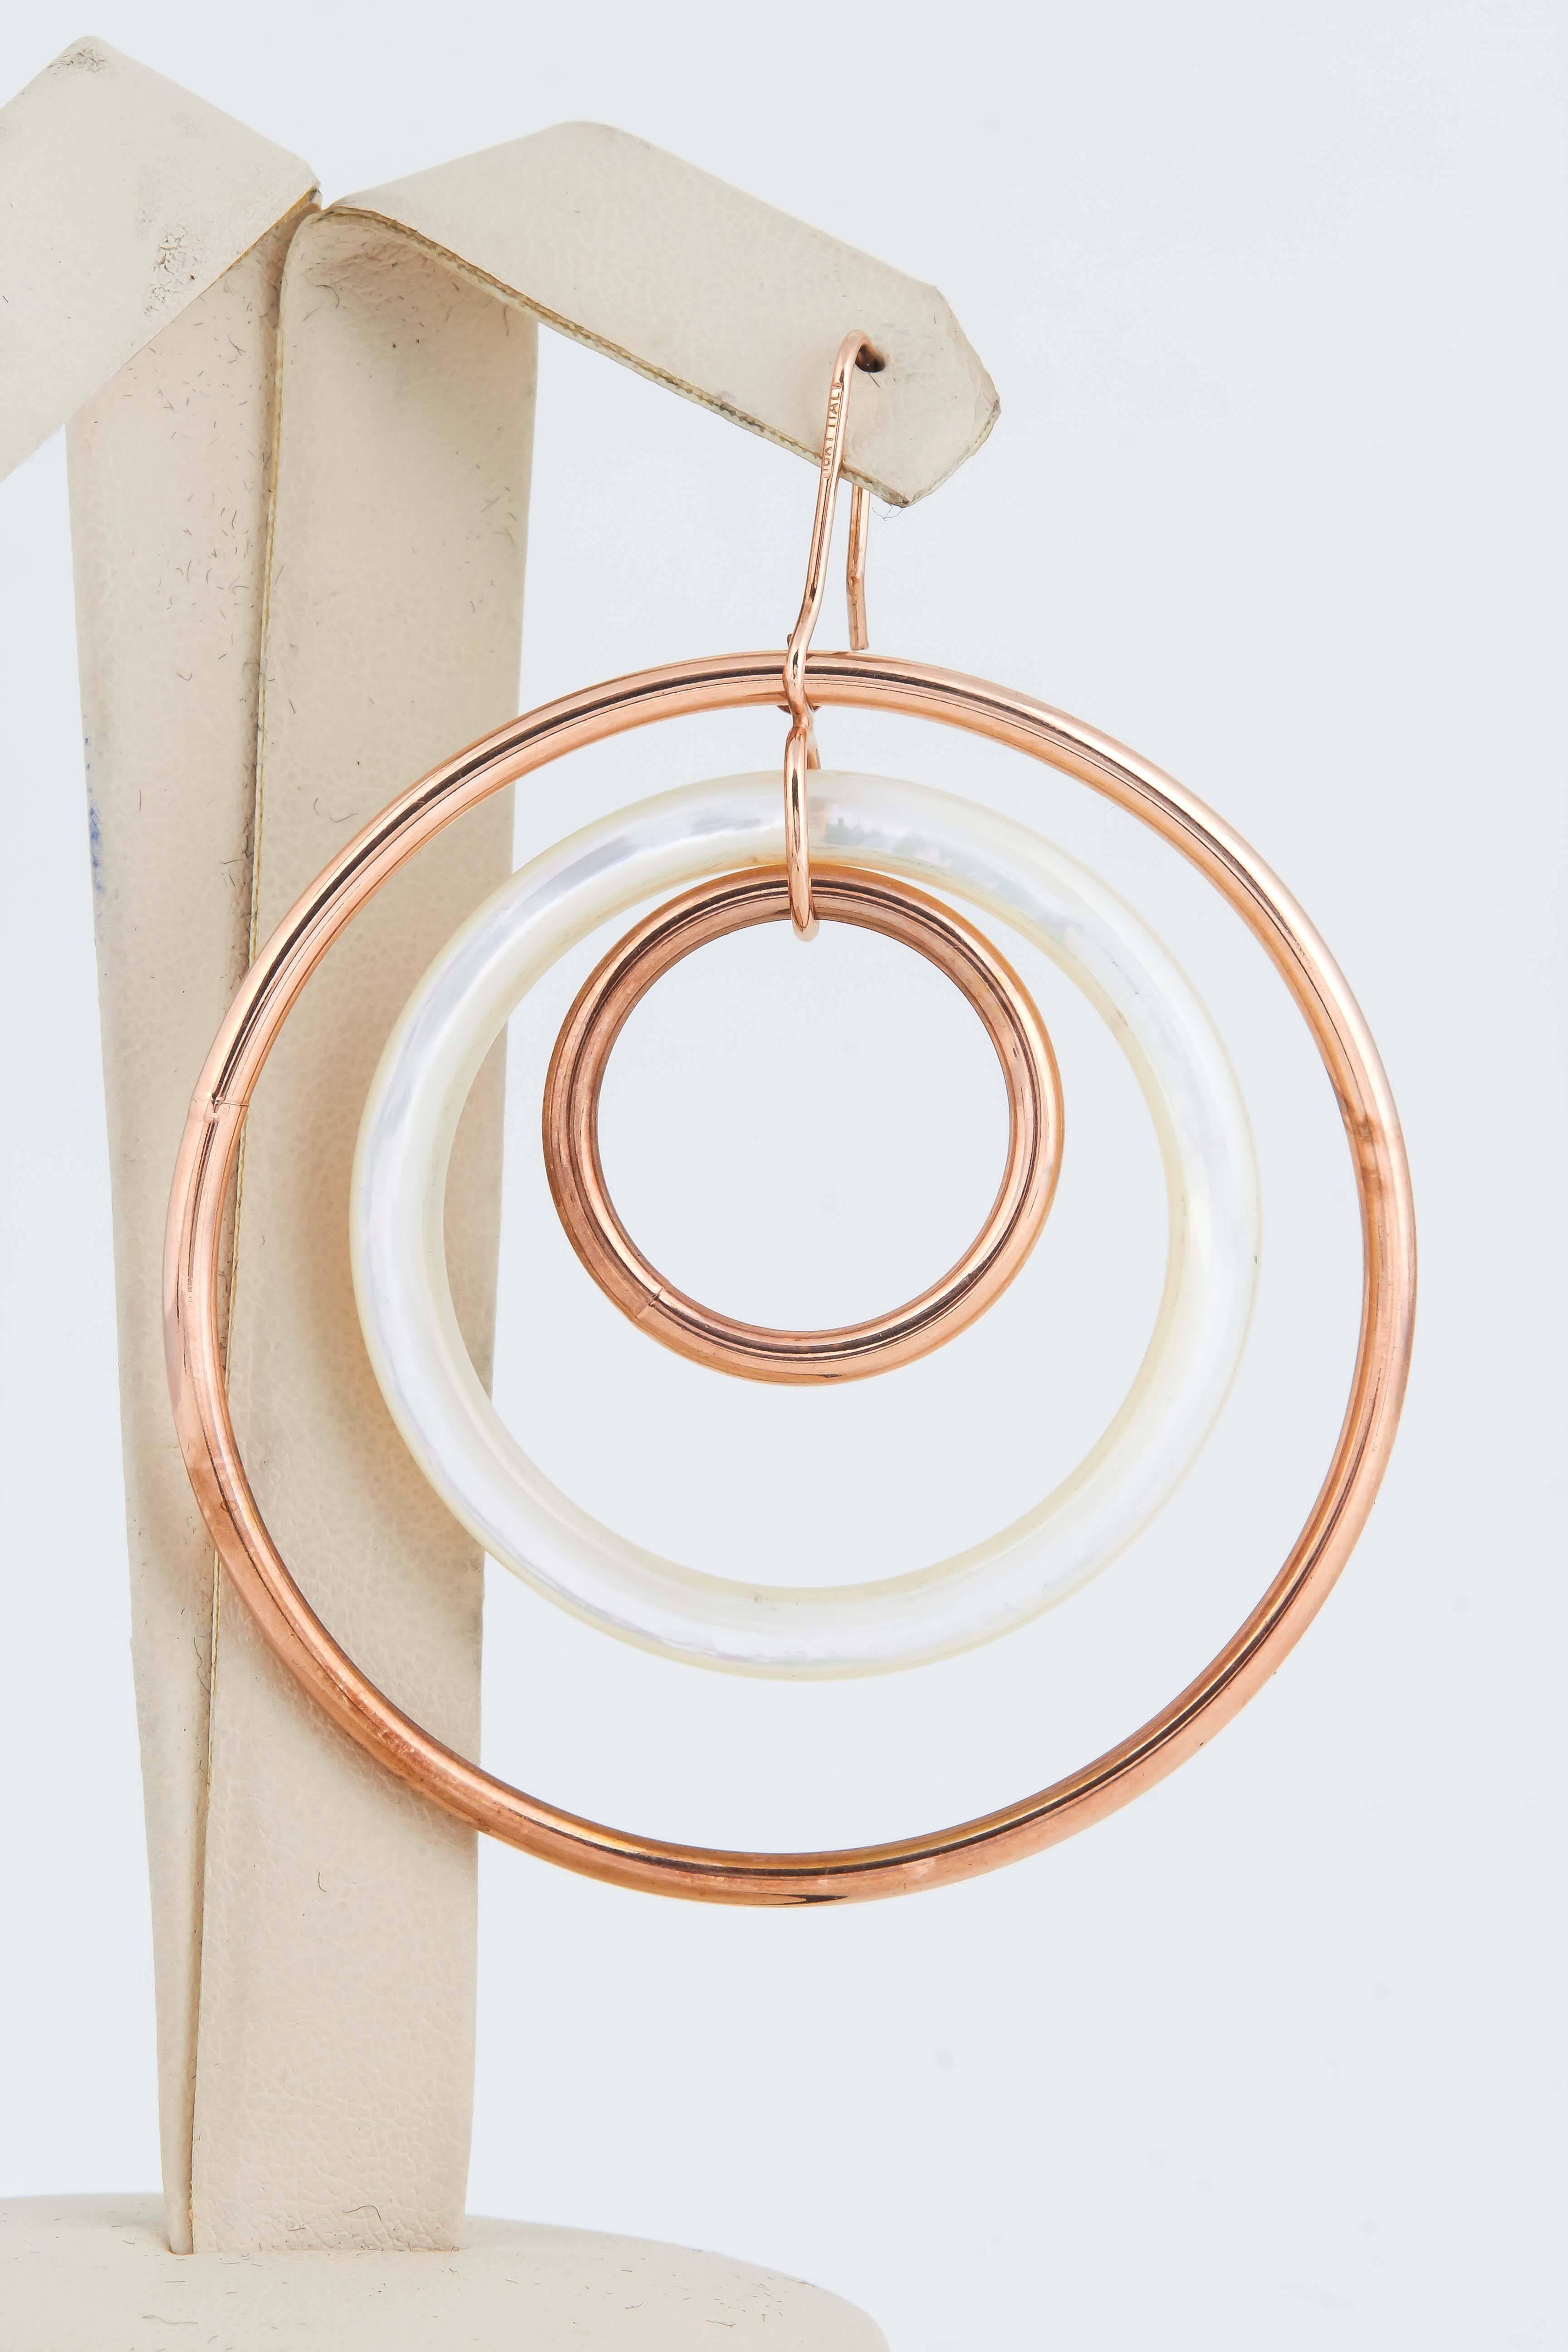 18kt Pink Gold Triple Loop Earrings Composed Of [2] Pink Gold Loops Which Are Centered By [1] Mother Of Pearl Custom Cut Loop. Earrings Are Flexible And Moveable Made With Shepard's Hooks Closures For Pierced Ears Only . Designed In America By